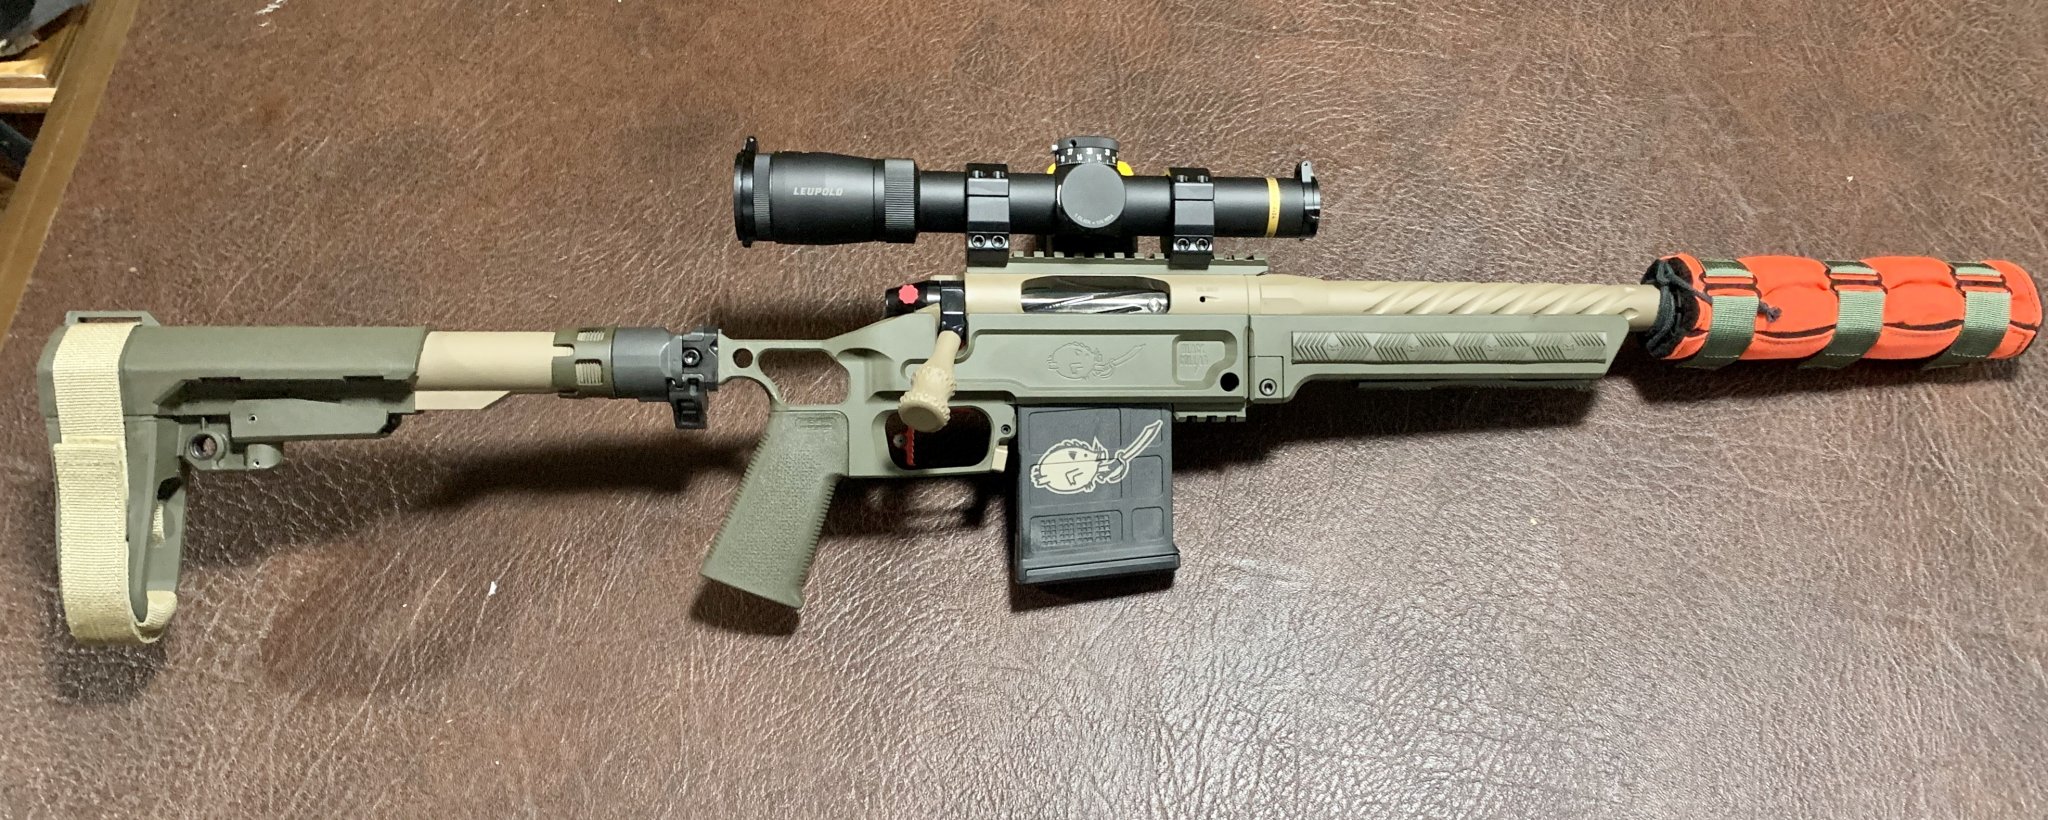 Pork Sword chassis by Black Collar Arms | Page 5 | Sniper's Hide Forum